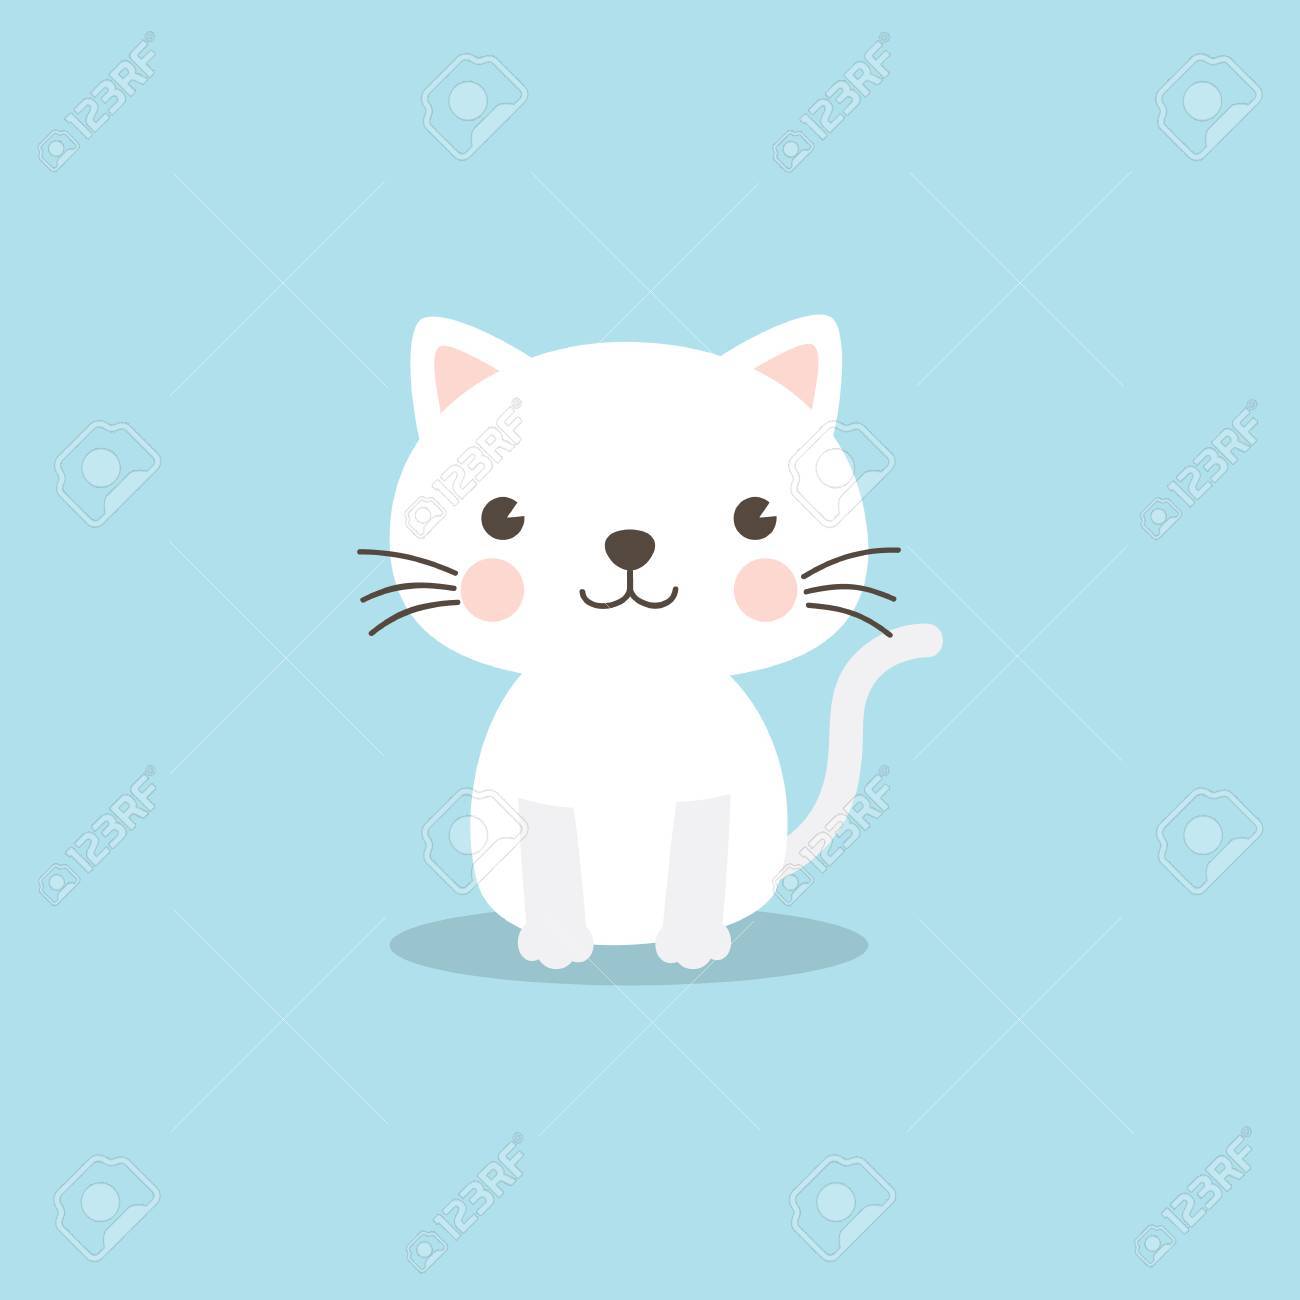 Cat Character A Cute White Kitten On Sky Blue Background Funny